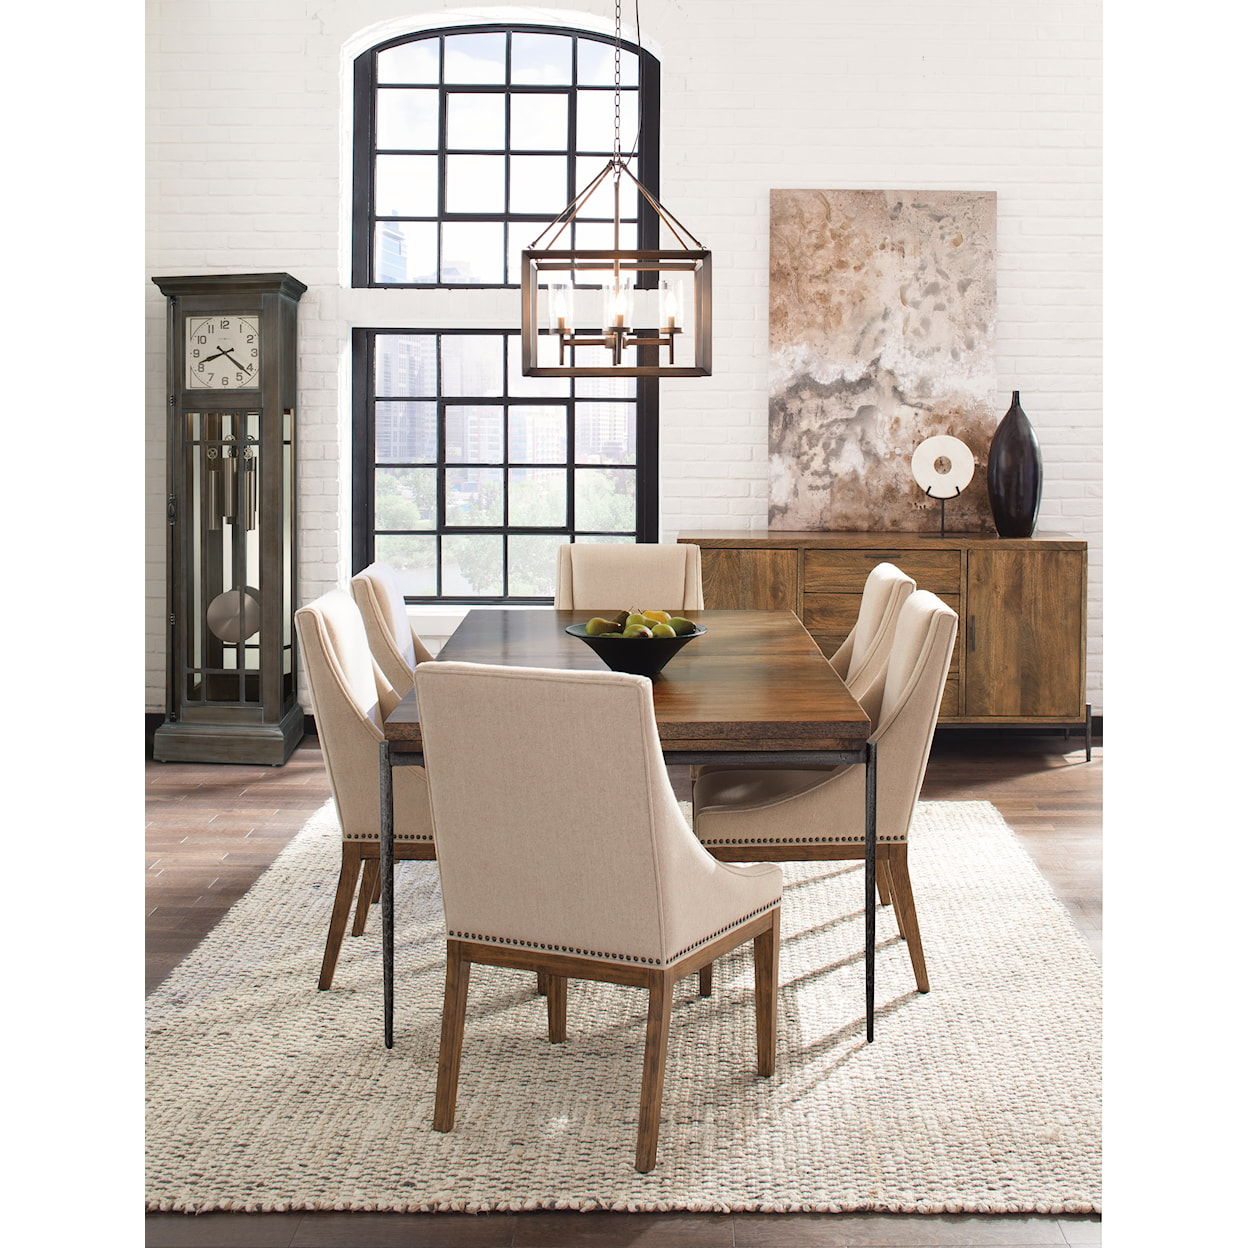 Hekman Bedford Park Sling Dining Chair